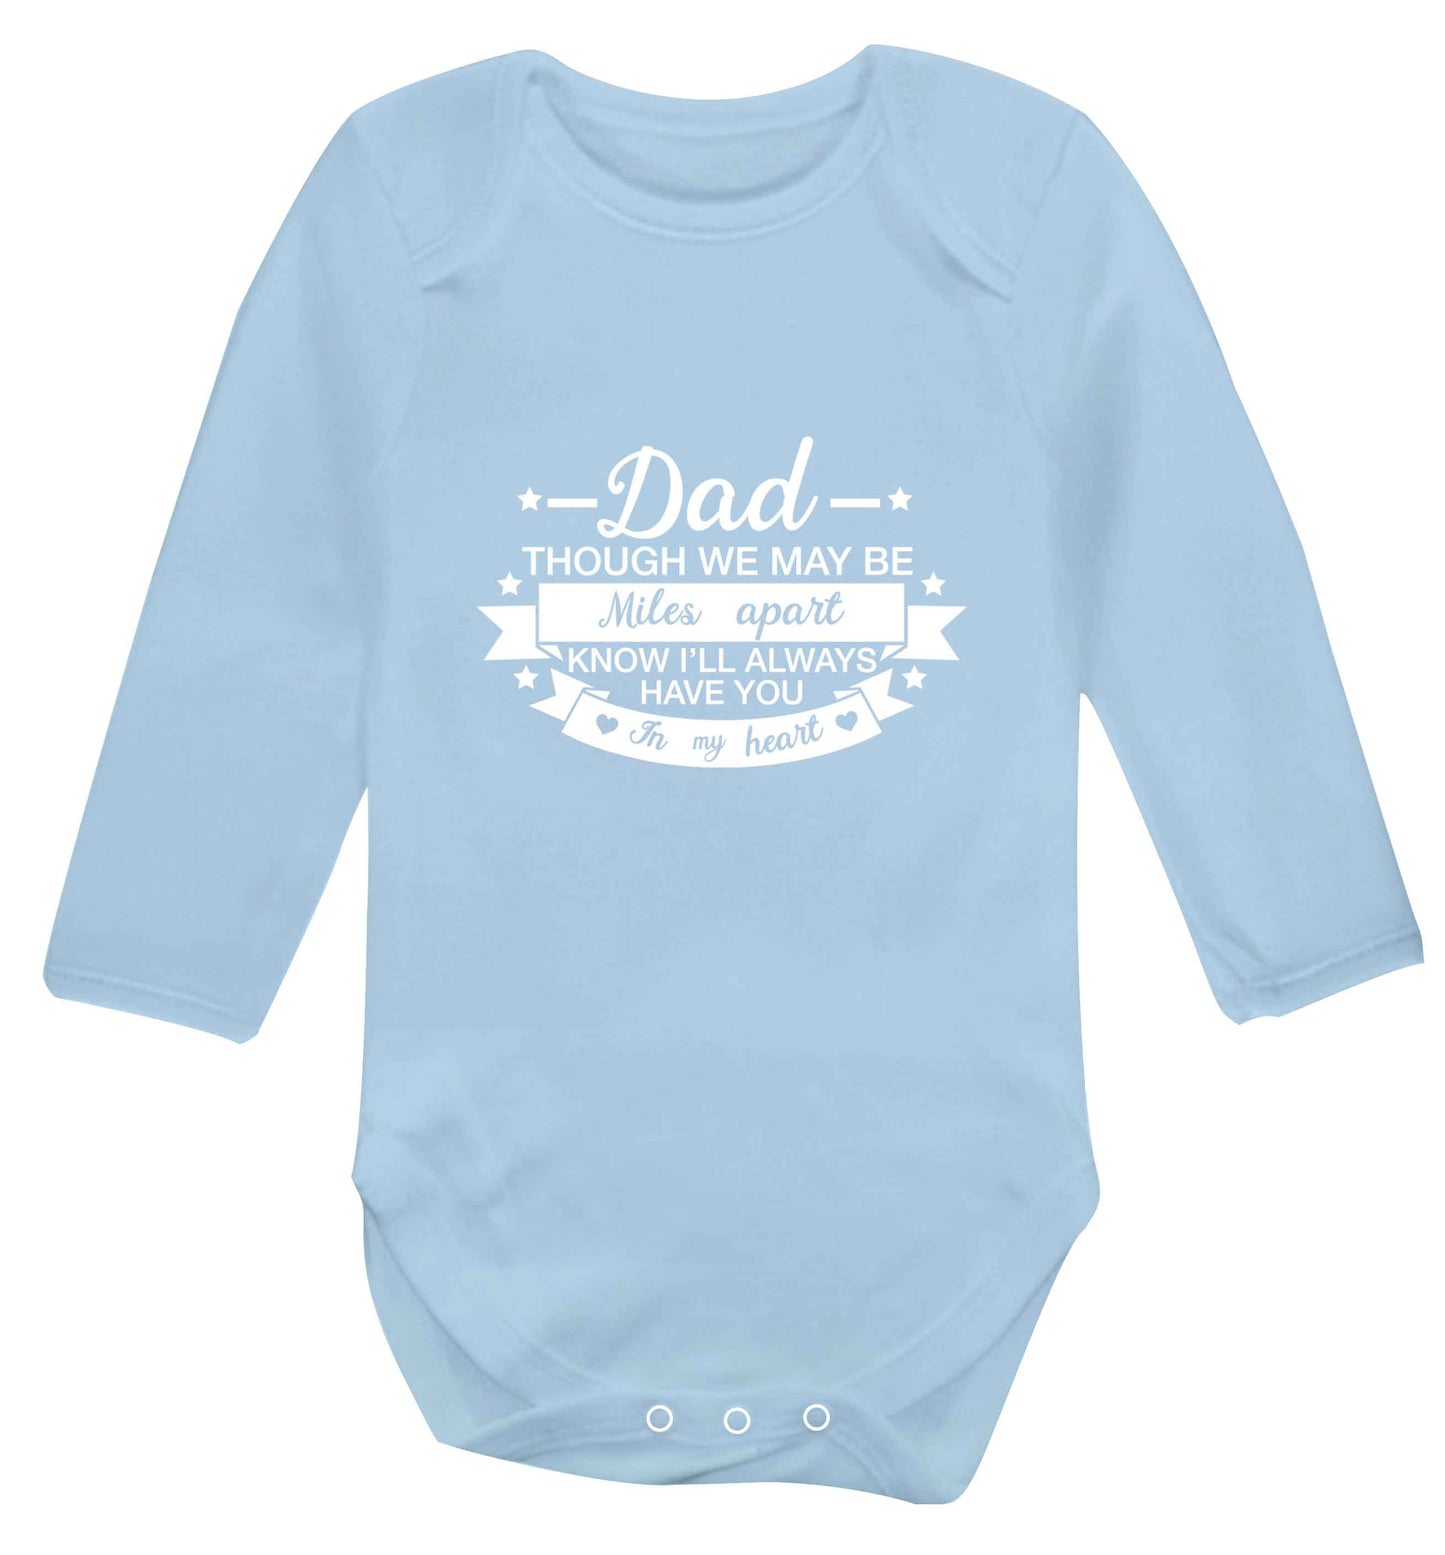 Dad though we are miles apart know I'll always have you in my heart baby vest long sleeved pale blue 6-12 months